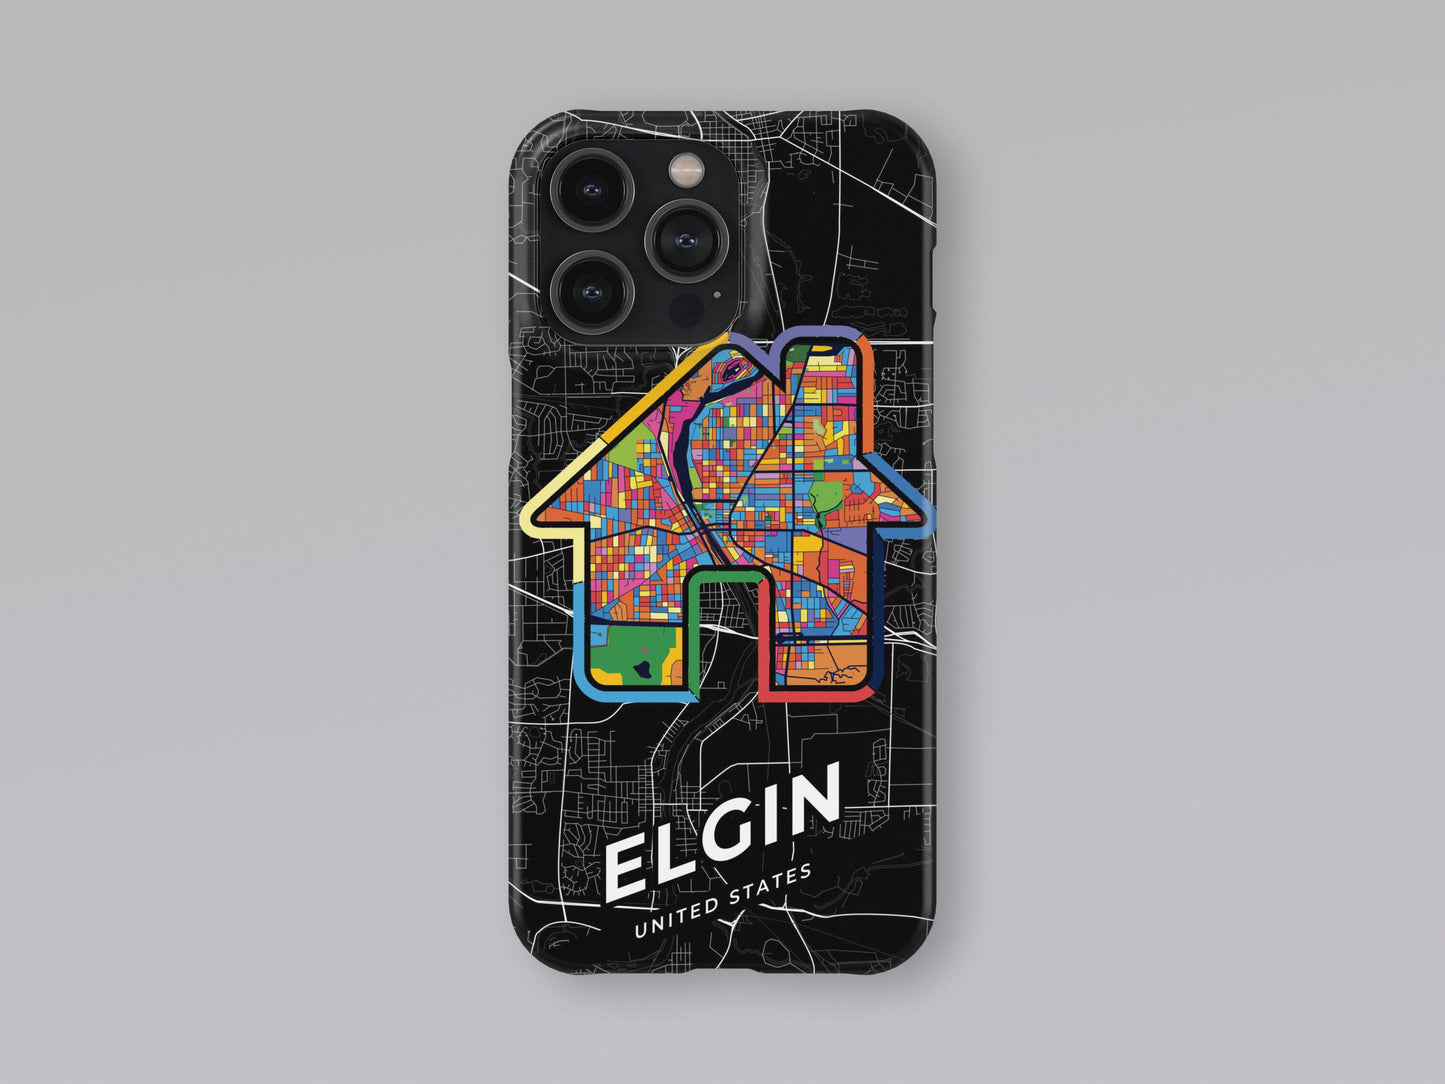 Elgin Illinois slim phone case with colorful icon. Birthday, wedding or housewarming gift. Couple match cases. 3